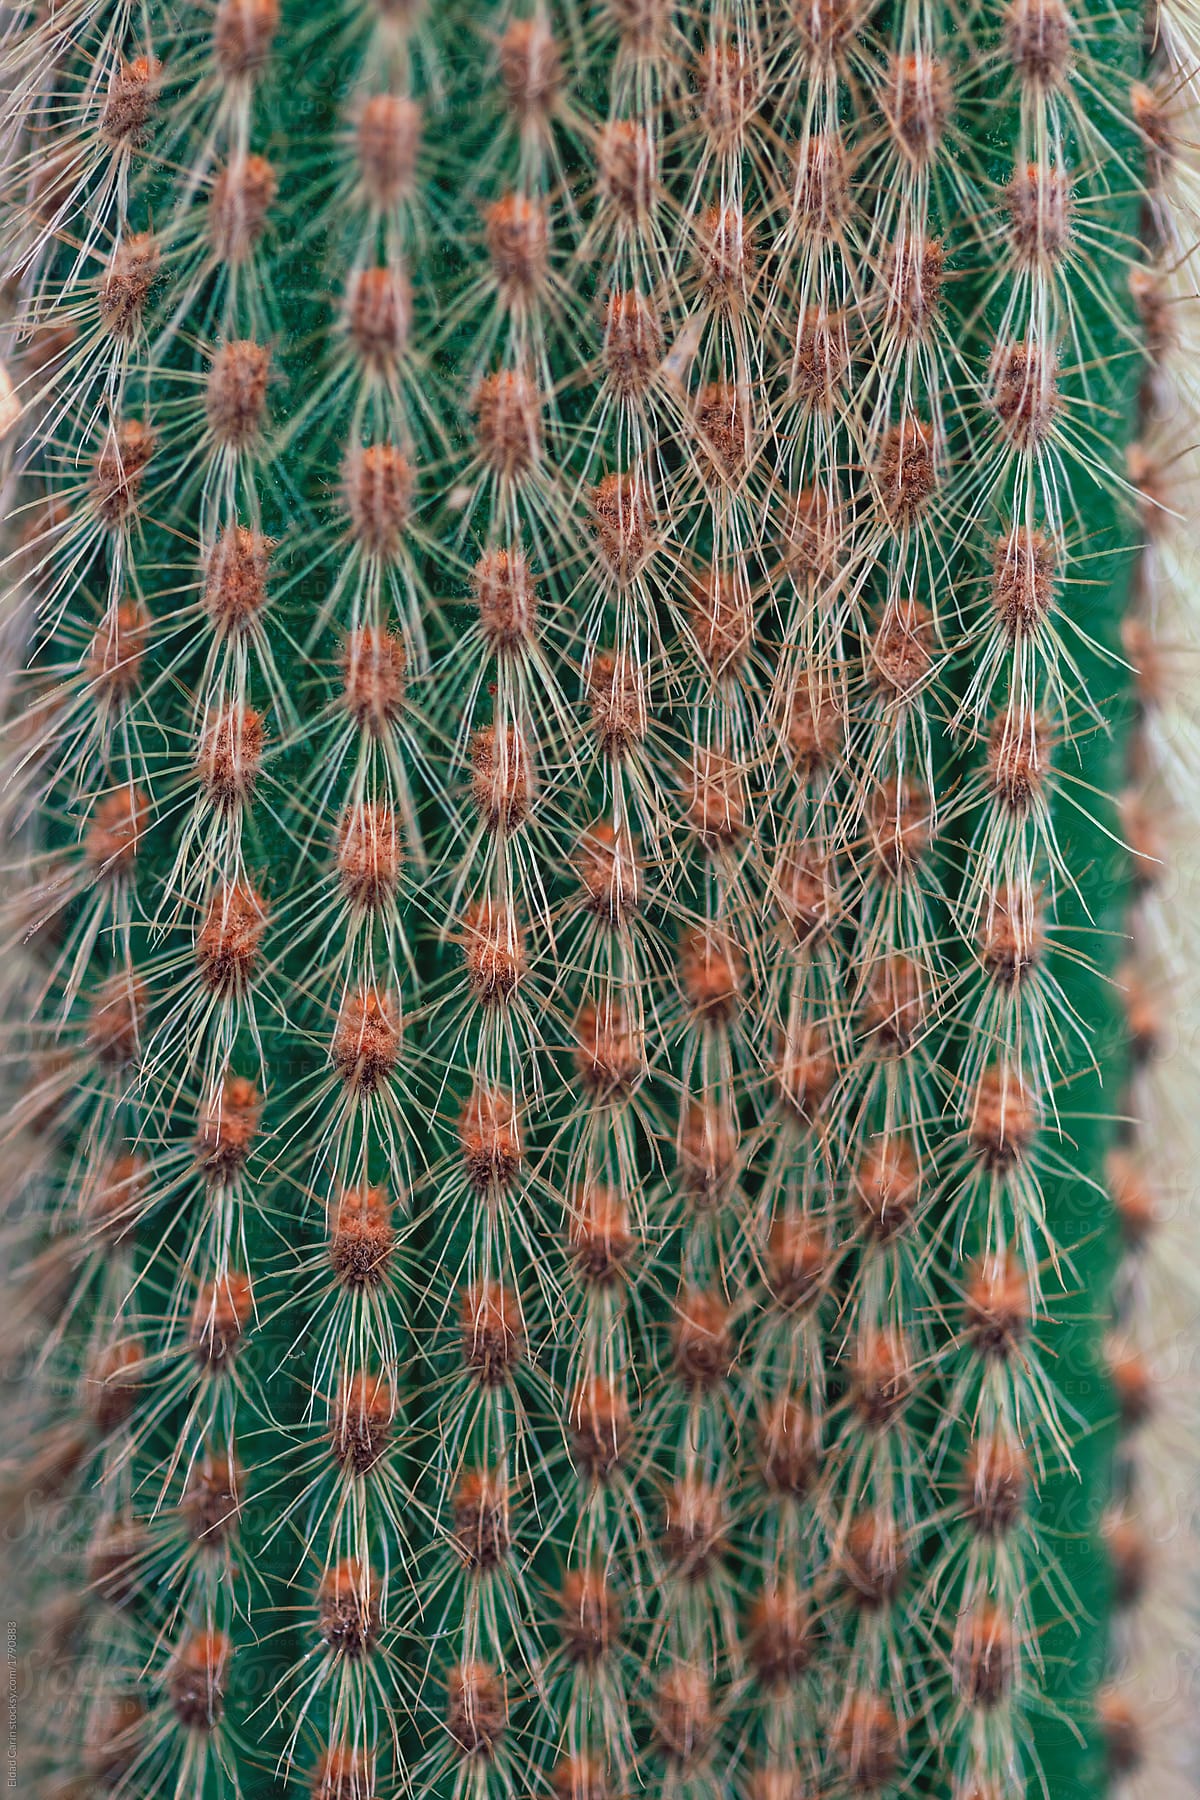 Spiked Cactus Surface Macro